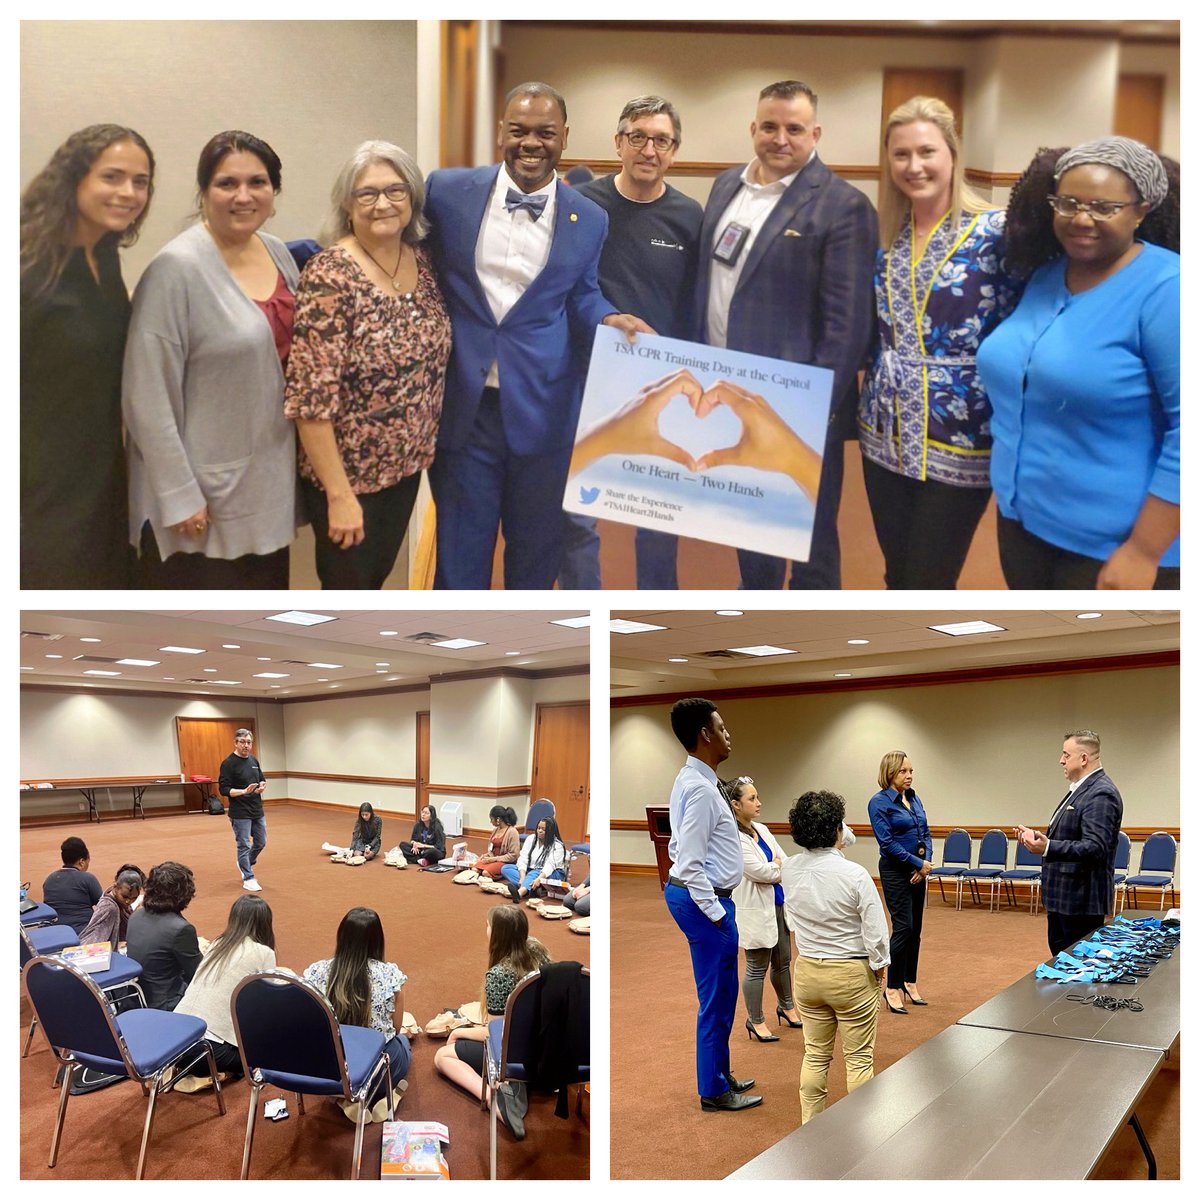 Every year, the TSA invites Texas Legislators and their staff to attend TSA CPR day. Thank you TSA President @dr_g_williams for attending & showing your support. Thank you Jason Mitchell for tourniquet training and American Heart Association for CPR training! #TSA1Heart2Hands